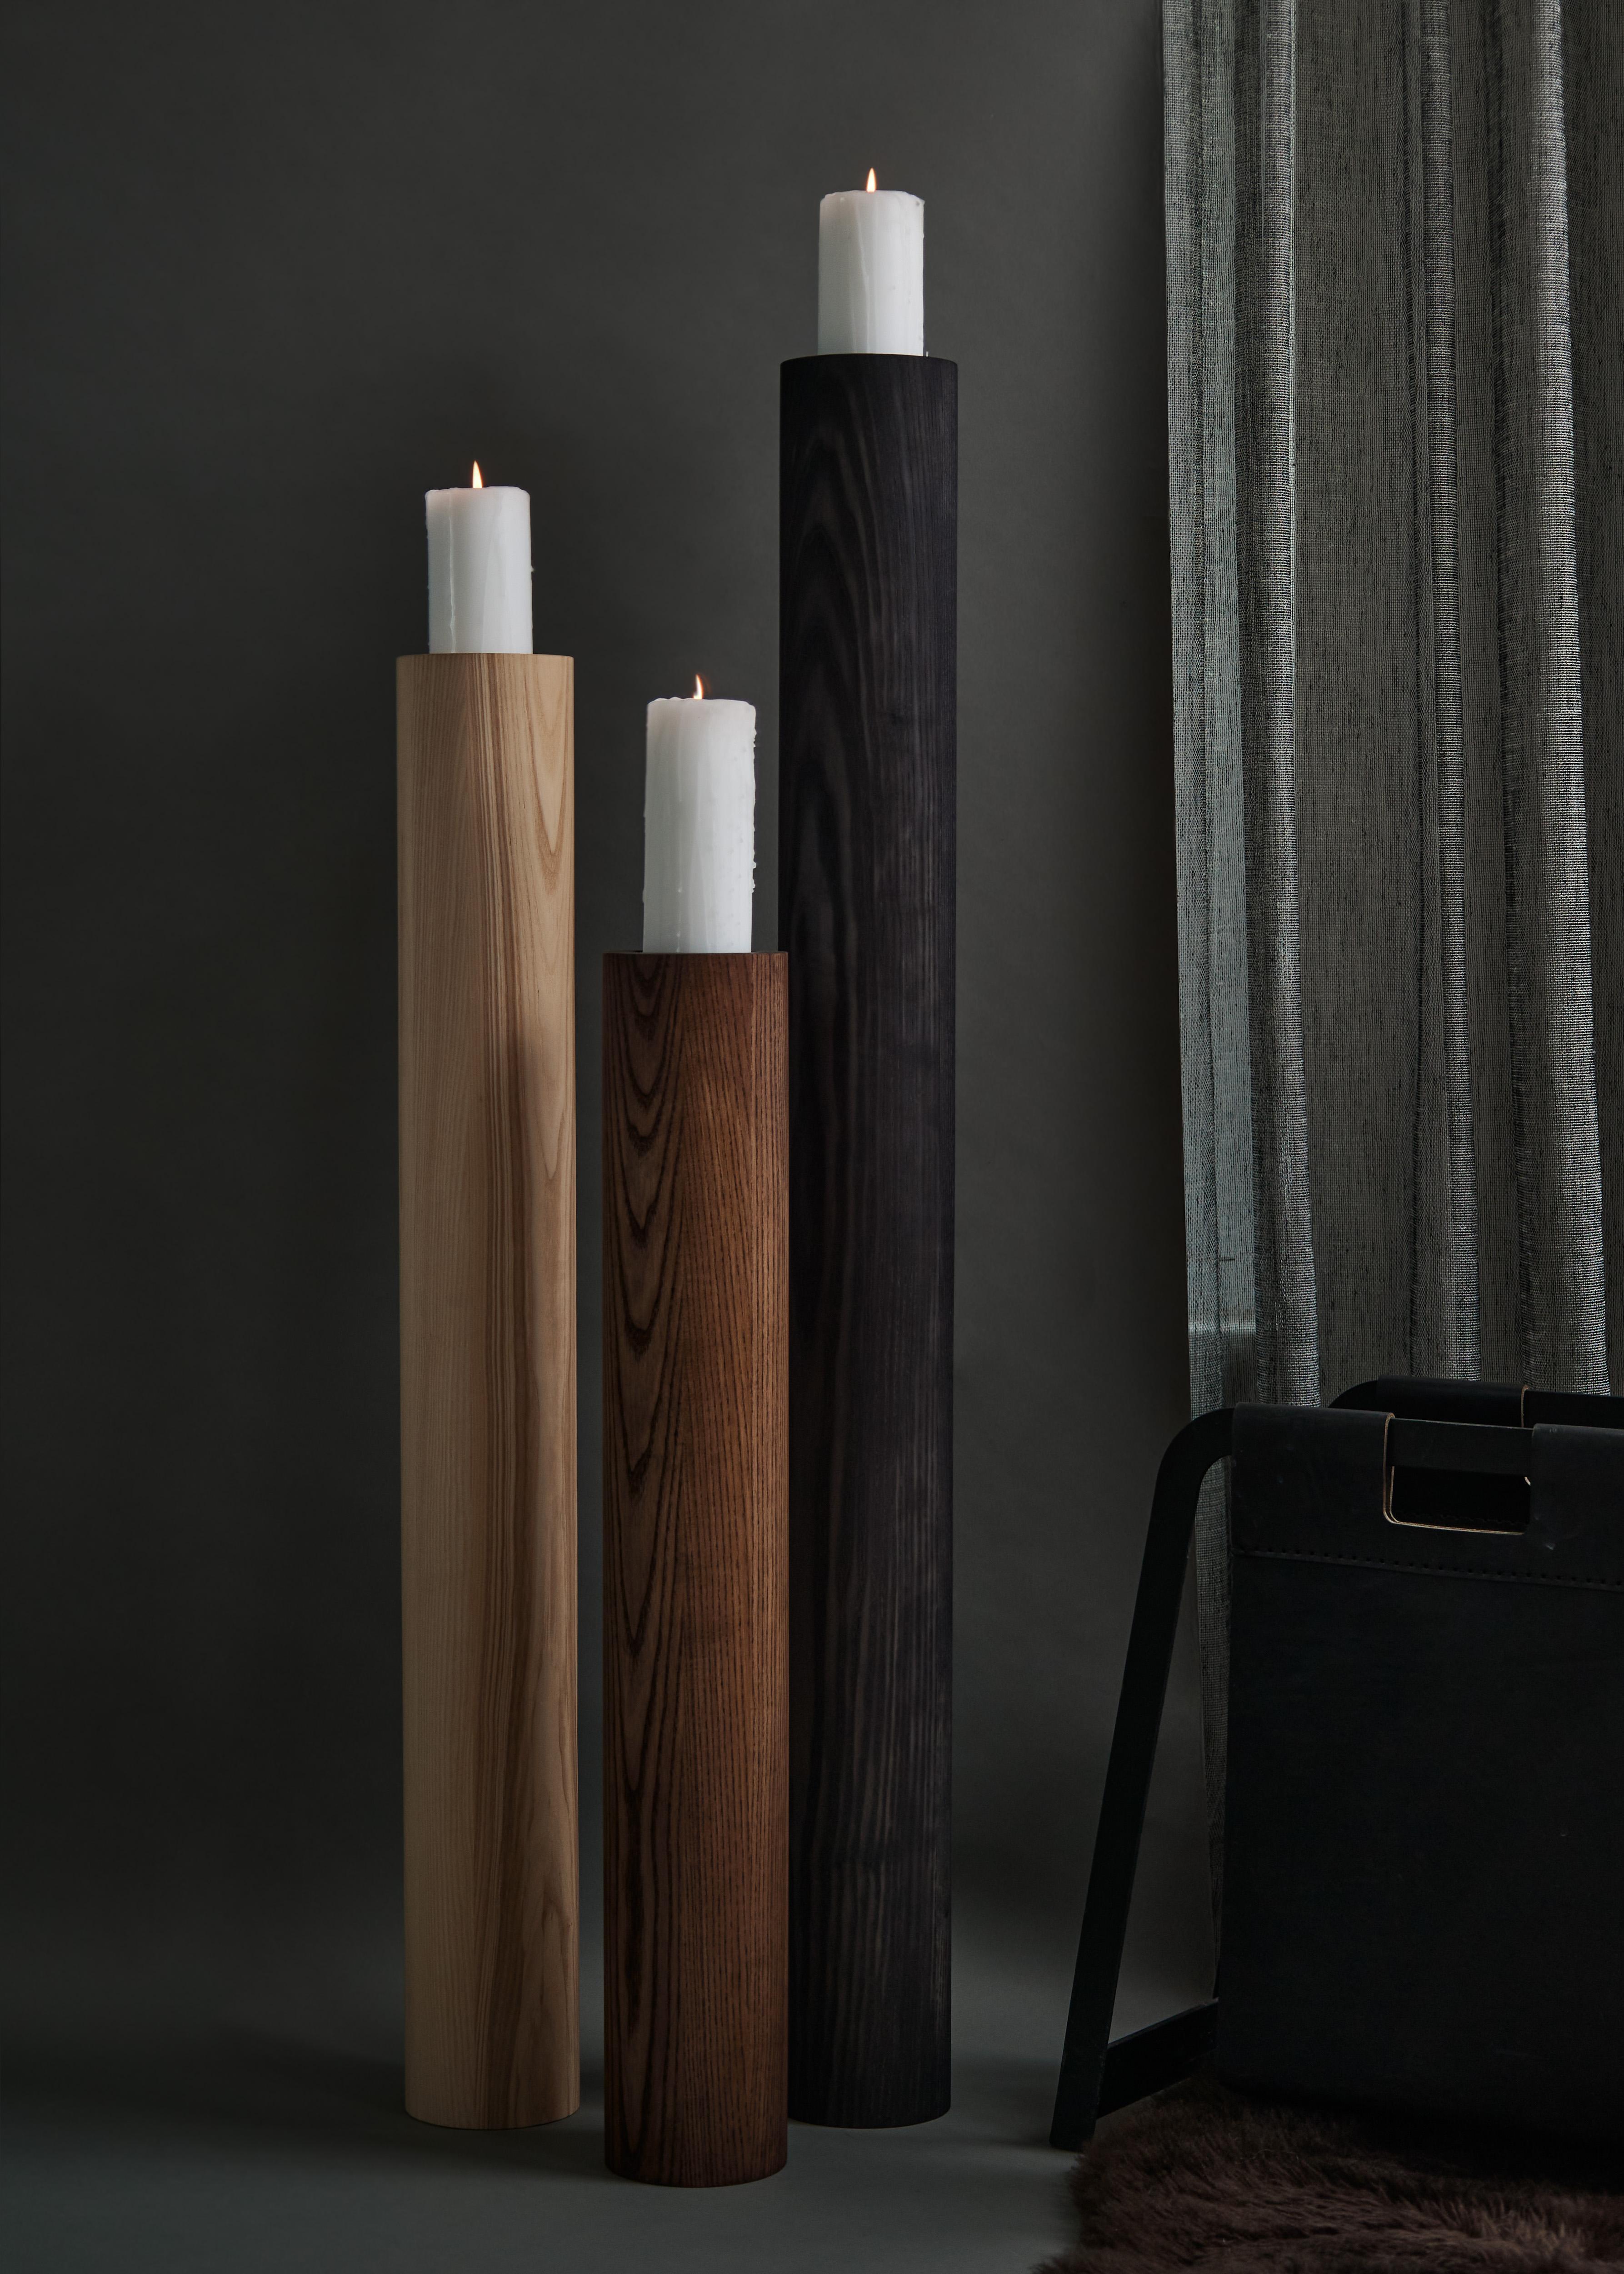 Set of 3 J D Candle Holders Timber by Nish Studio
Dimensions: D12 x H 79/ 98.7 /118 cm 
Materials: Ash, Timber satined natural light, chocolate + grey


N I S H is a Cape Town based Fashion and Furniture design studio. N I S H creates contemporary,